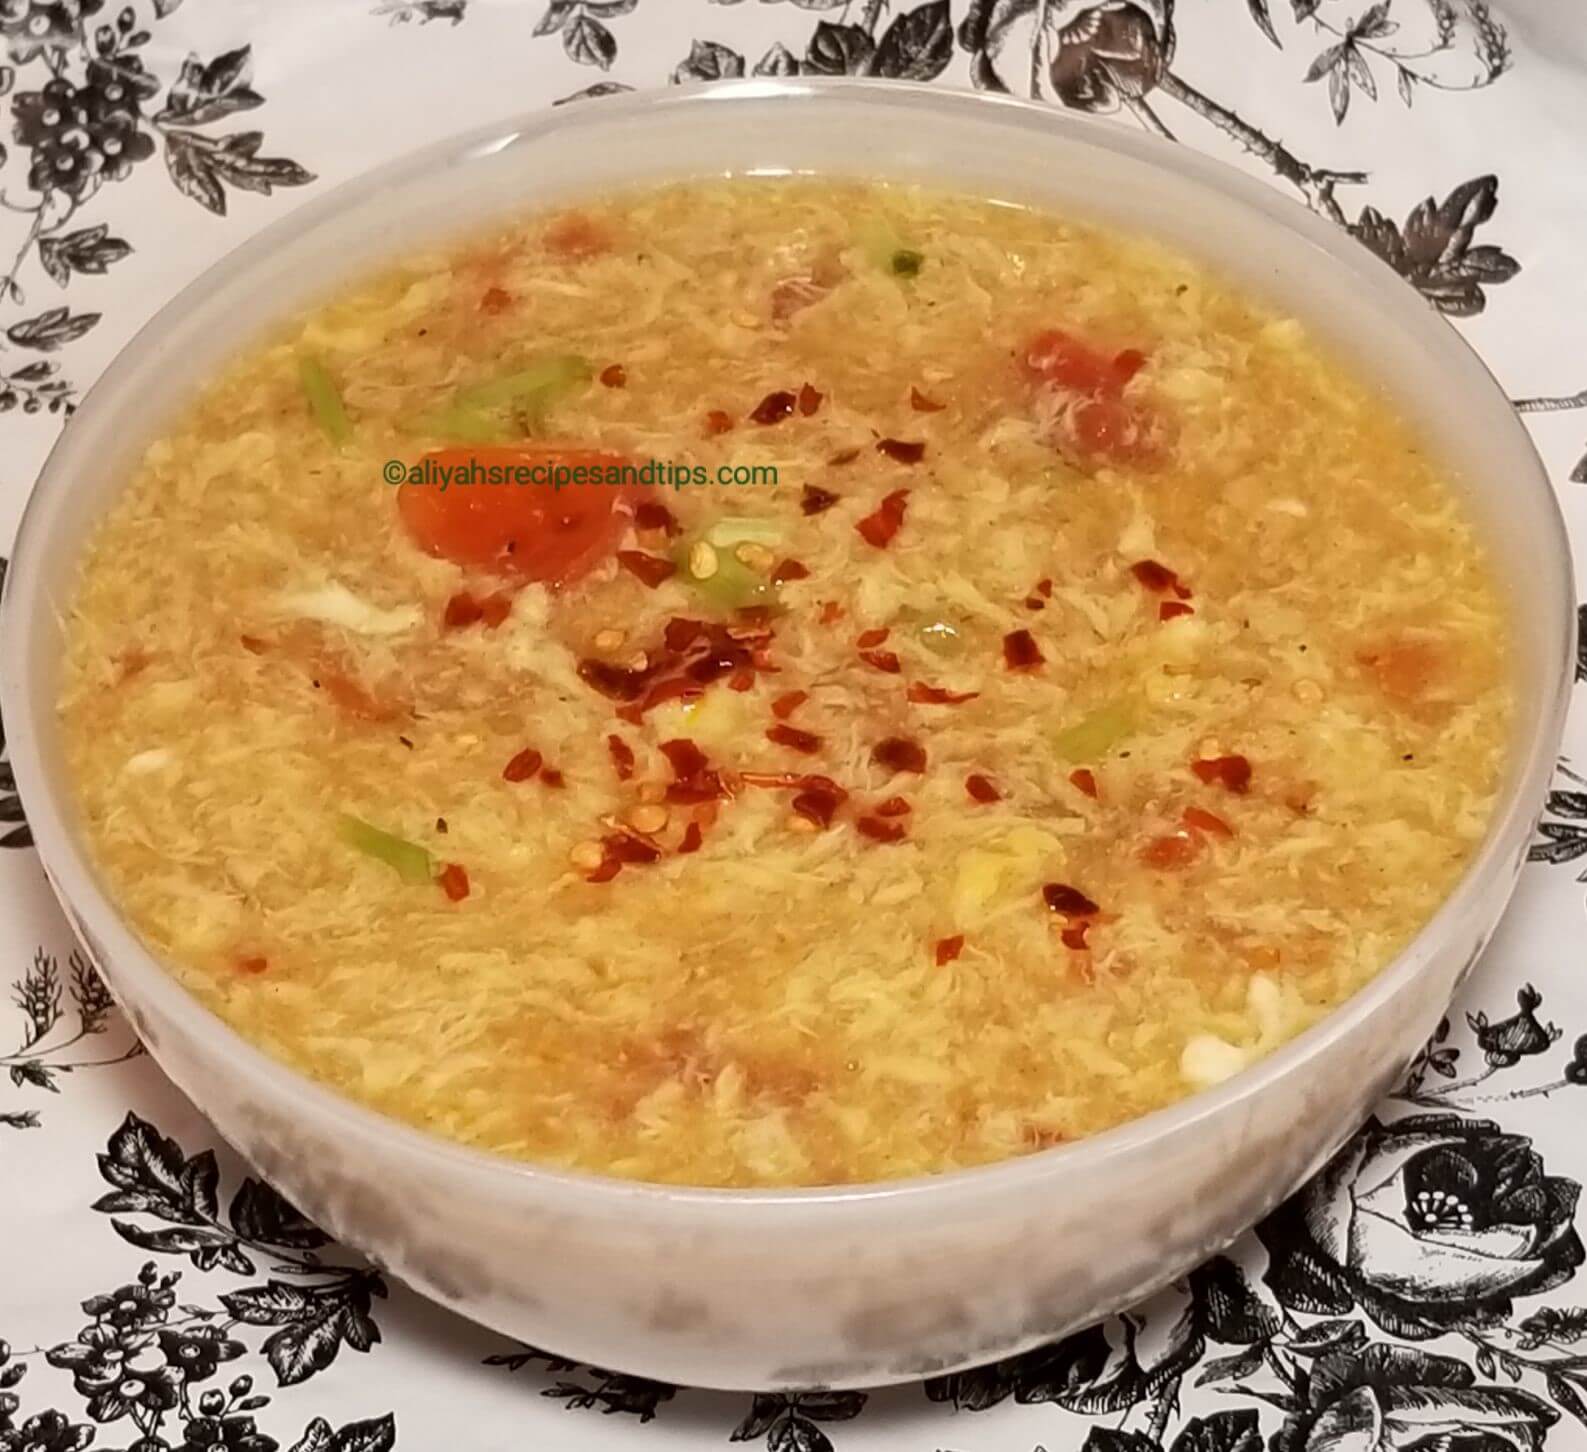 egg drop soup recipe, easy, Chinese, simple, simple egg drop soup, Japanese, Affordable, silky egg drop soup, silky, bean sprout, healthy, pinoy, keto, filipino, seafood Ginger, restaurant style egg drop soup, shrimp, spicy egg drop soup, egg drop soup recipe, egg drop soup, egg drop, tomato egg drop soup, the best egg drop soup, best egg drop soup, 10 minutes egg drop soup, 15 minutes egg drop soup, easy egg drop soup, winter egg drop soup, hot soup Authenthic, authentic egg drop soup, vegetable, mushroom, spinach, corn, cream corn